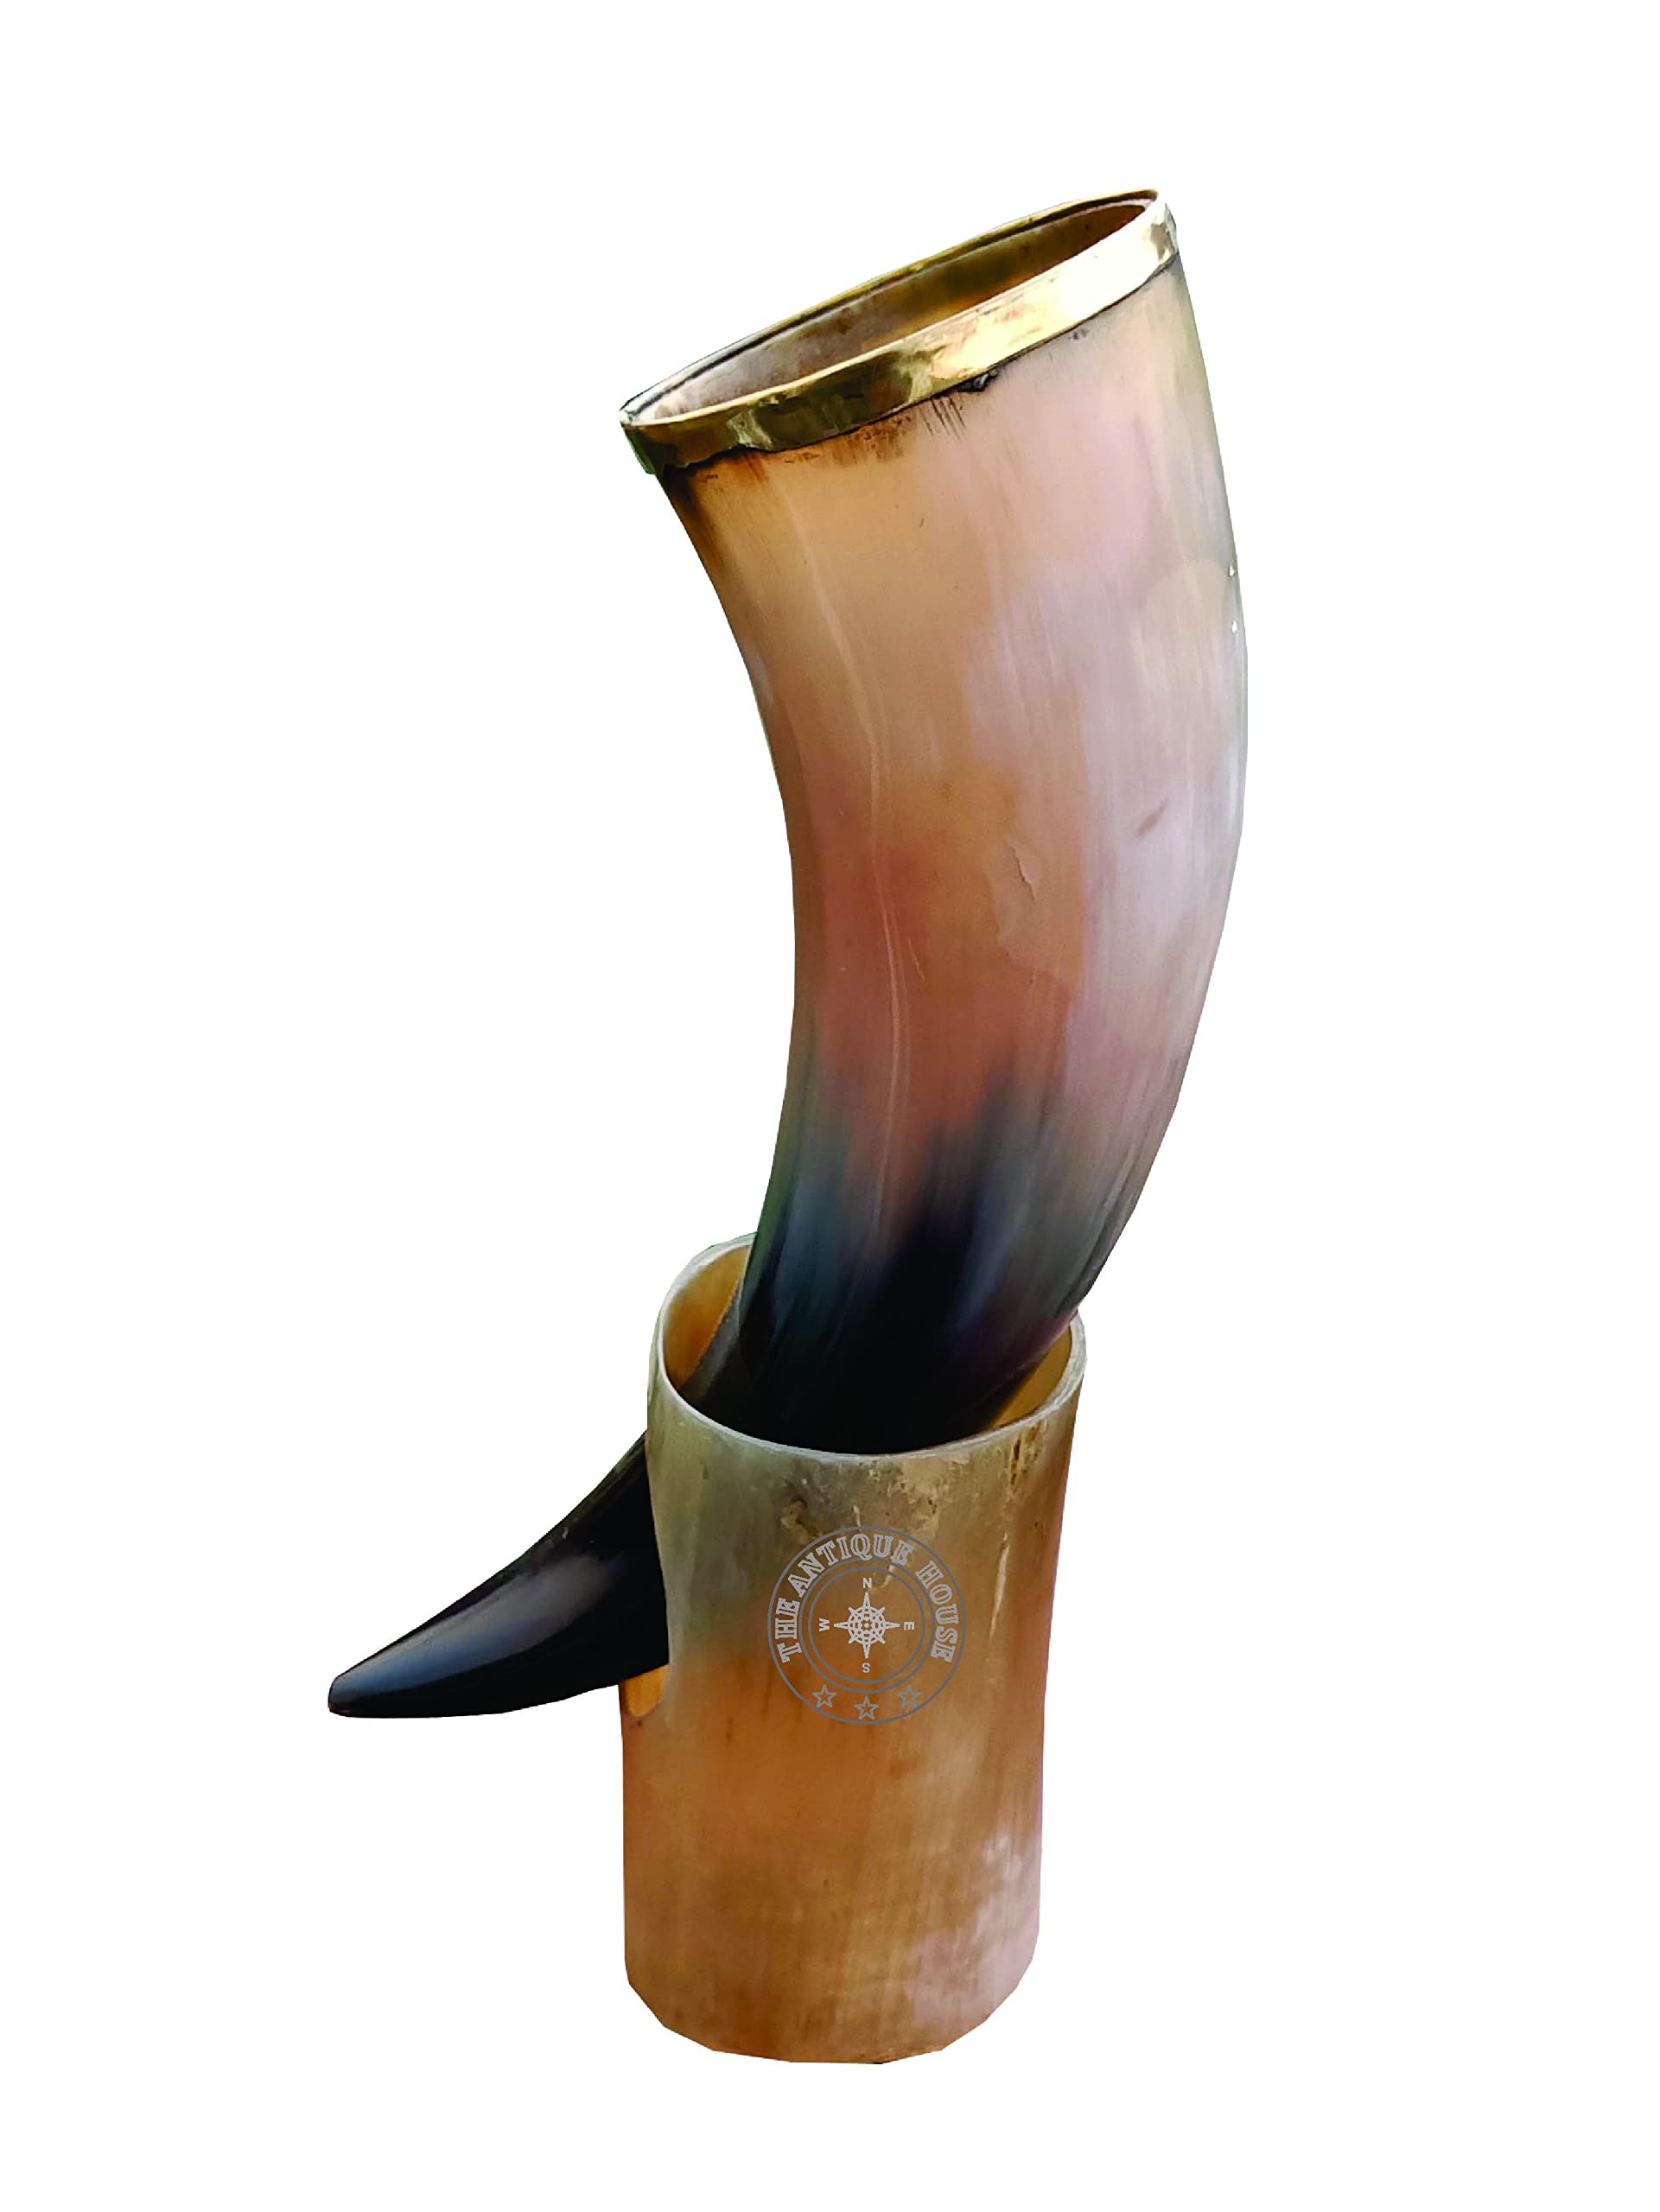 Real Ox Horn Drinking Horn Mug With Stand Viking Antique Style Beer Wine Mead Mug Gift